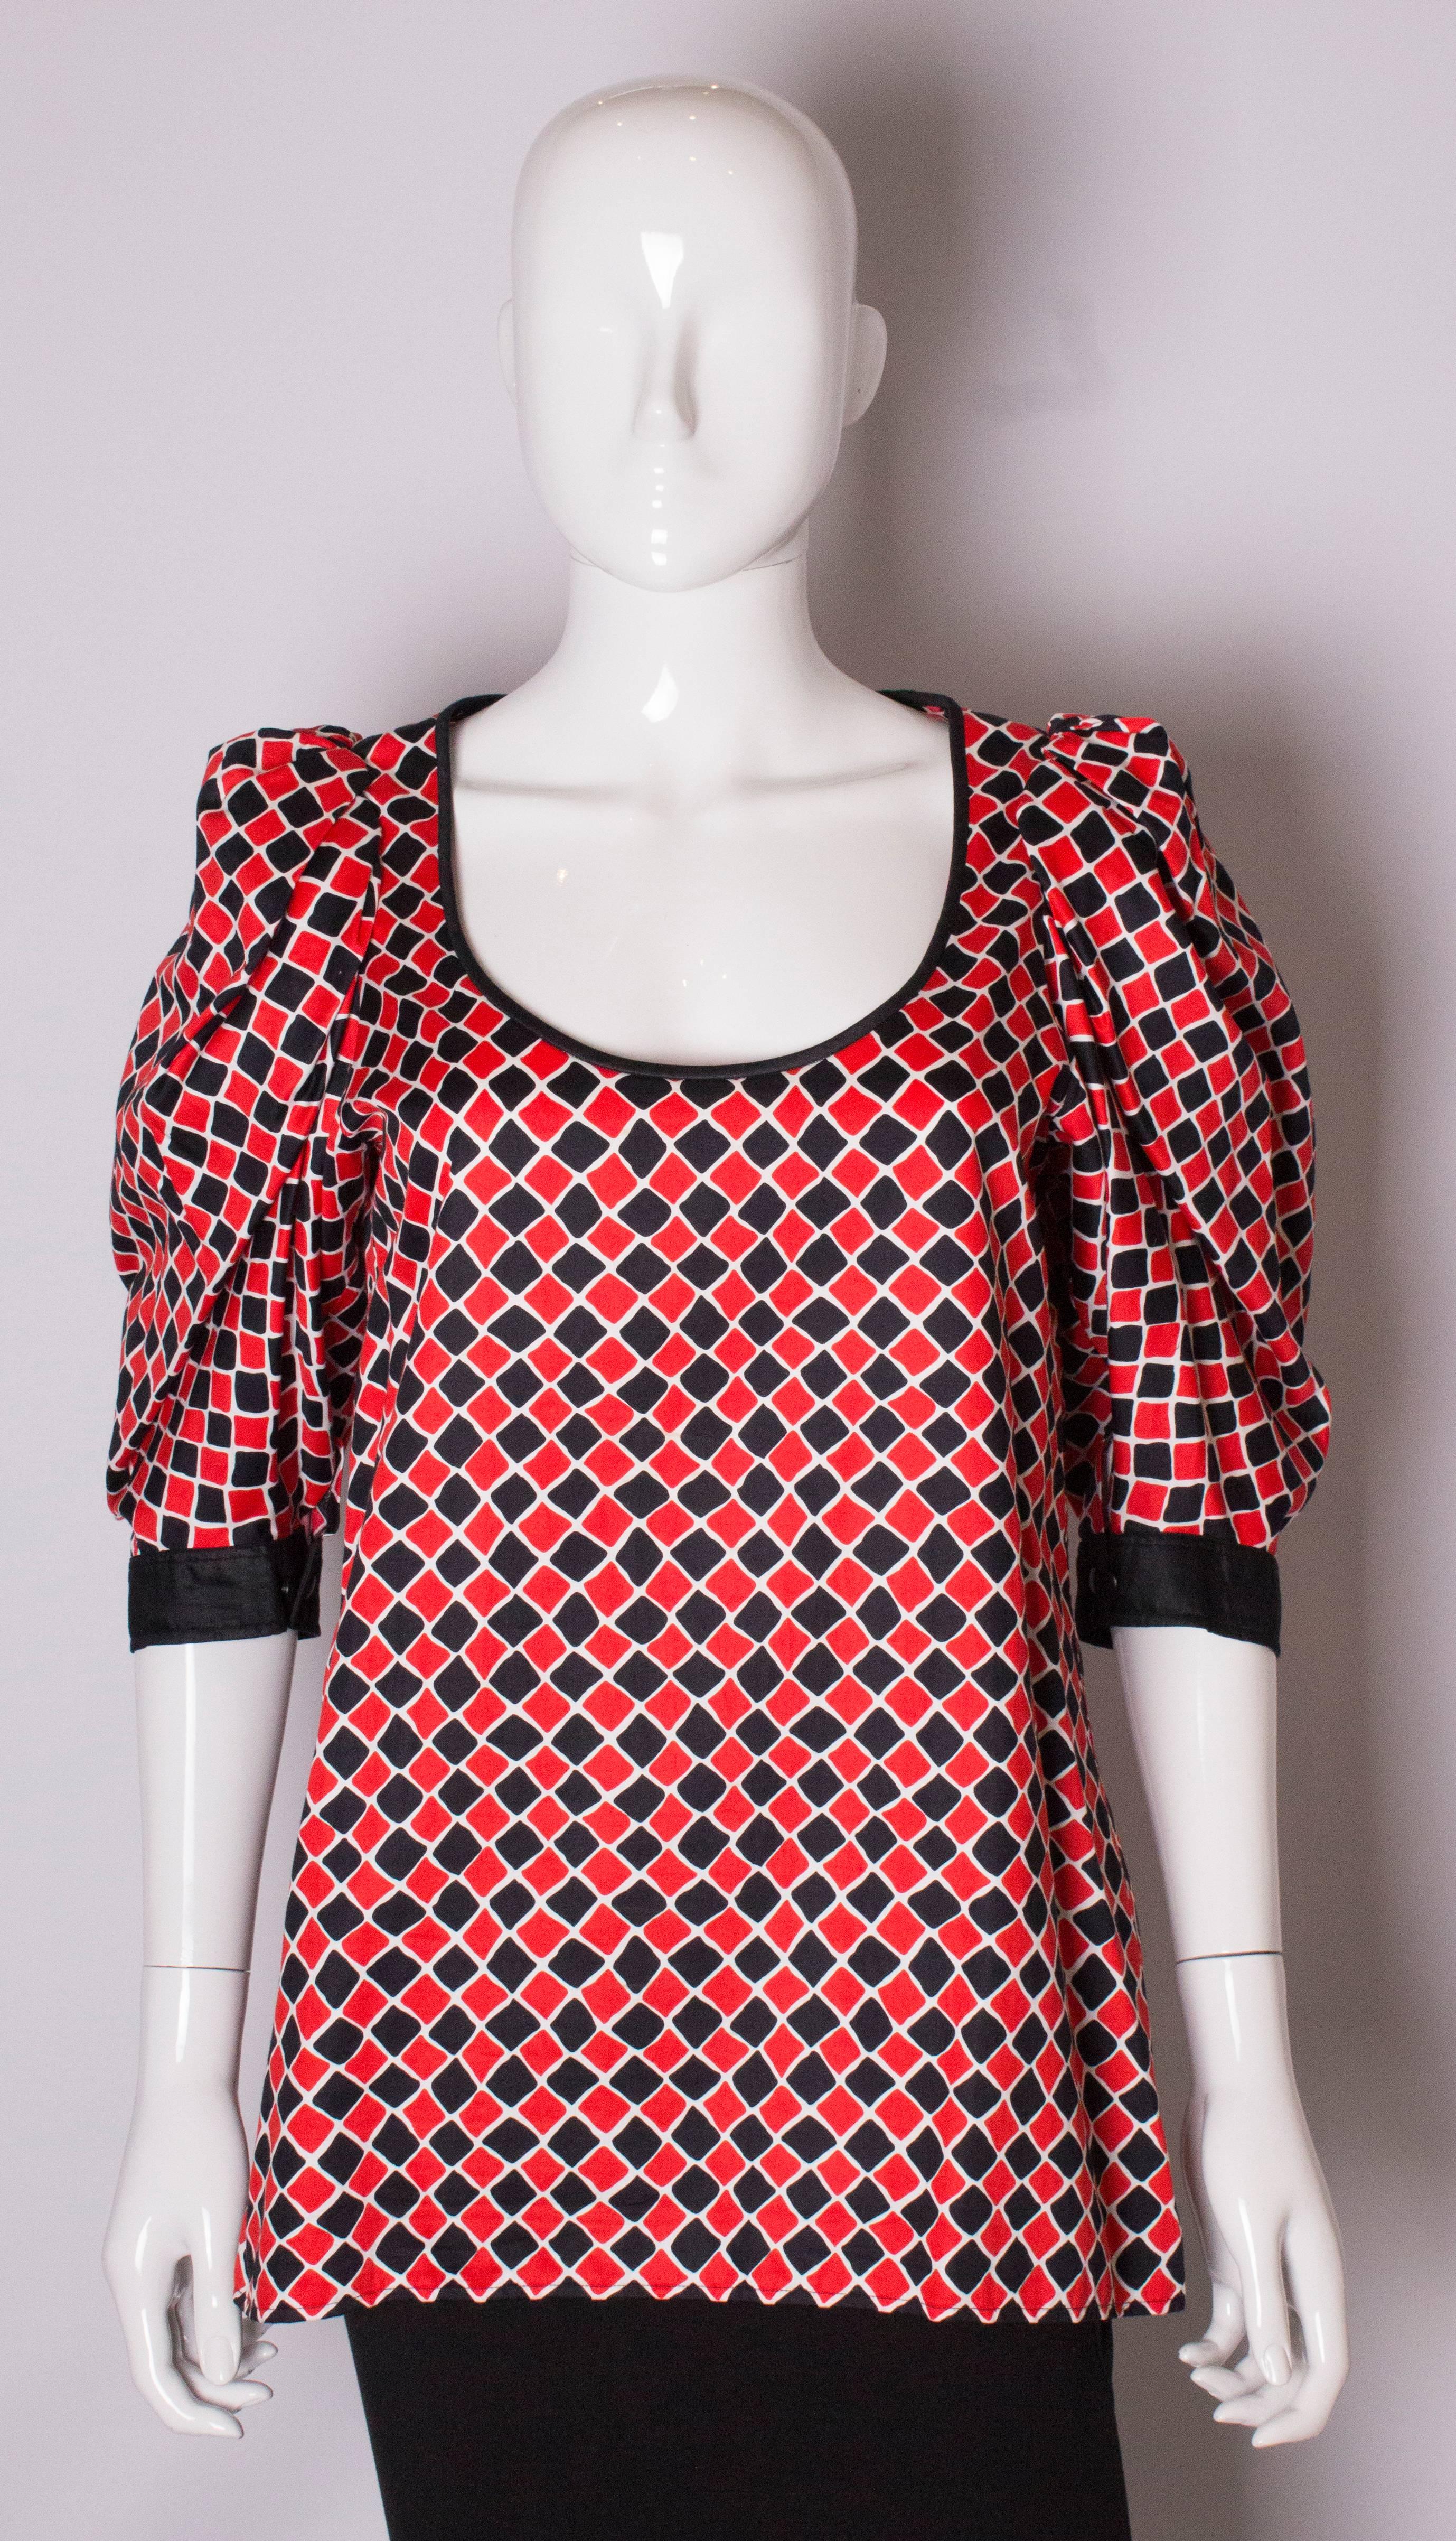 A chic and easy to wear top by Yves Saint Laurent , Rive Gauche. The top has a scoop neckline, a white background with a black and red diamond print , black edging, and elbow length sleeves with double buttons.